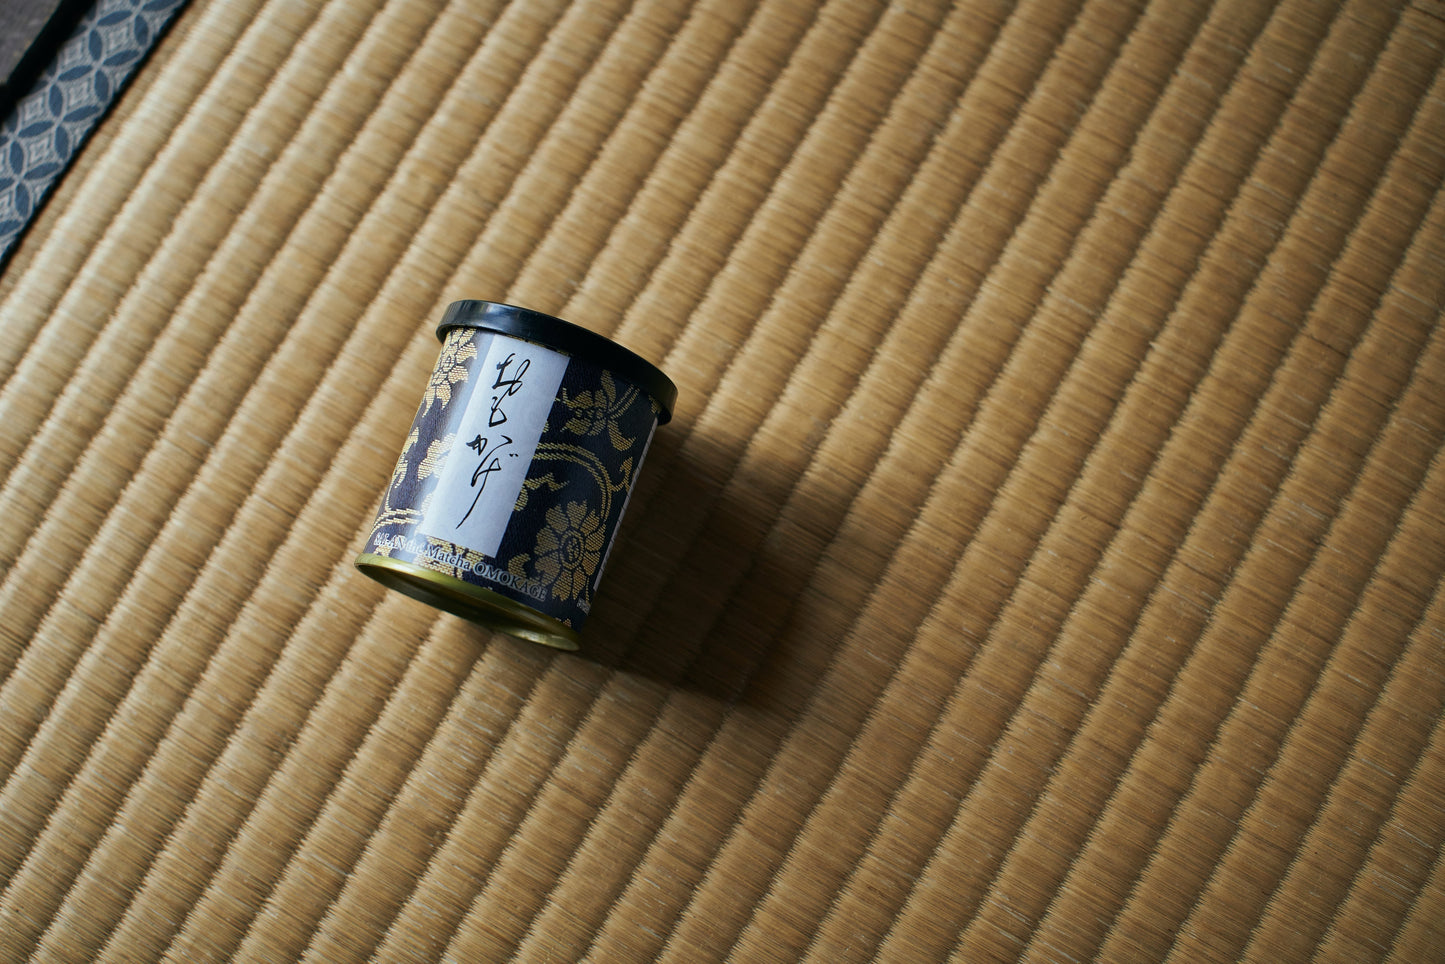 <tc>Matcha Subscription (4 cans every 2 months)</tc>